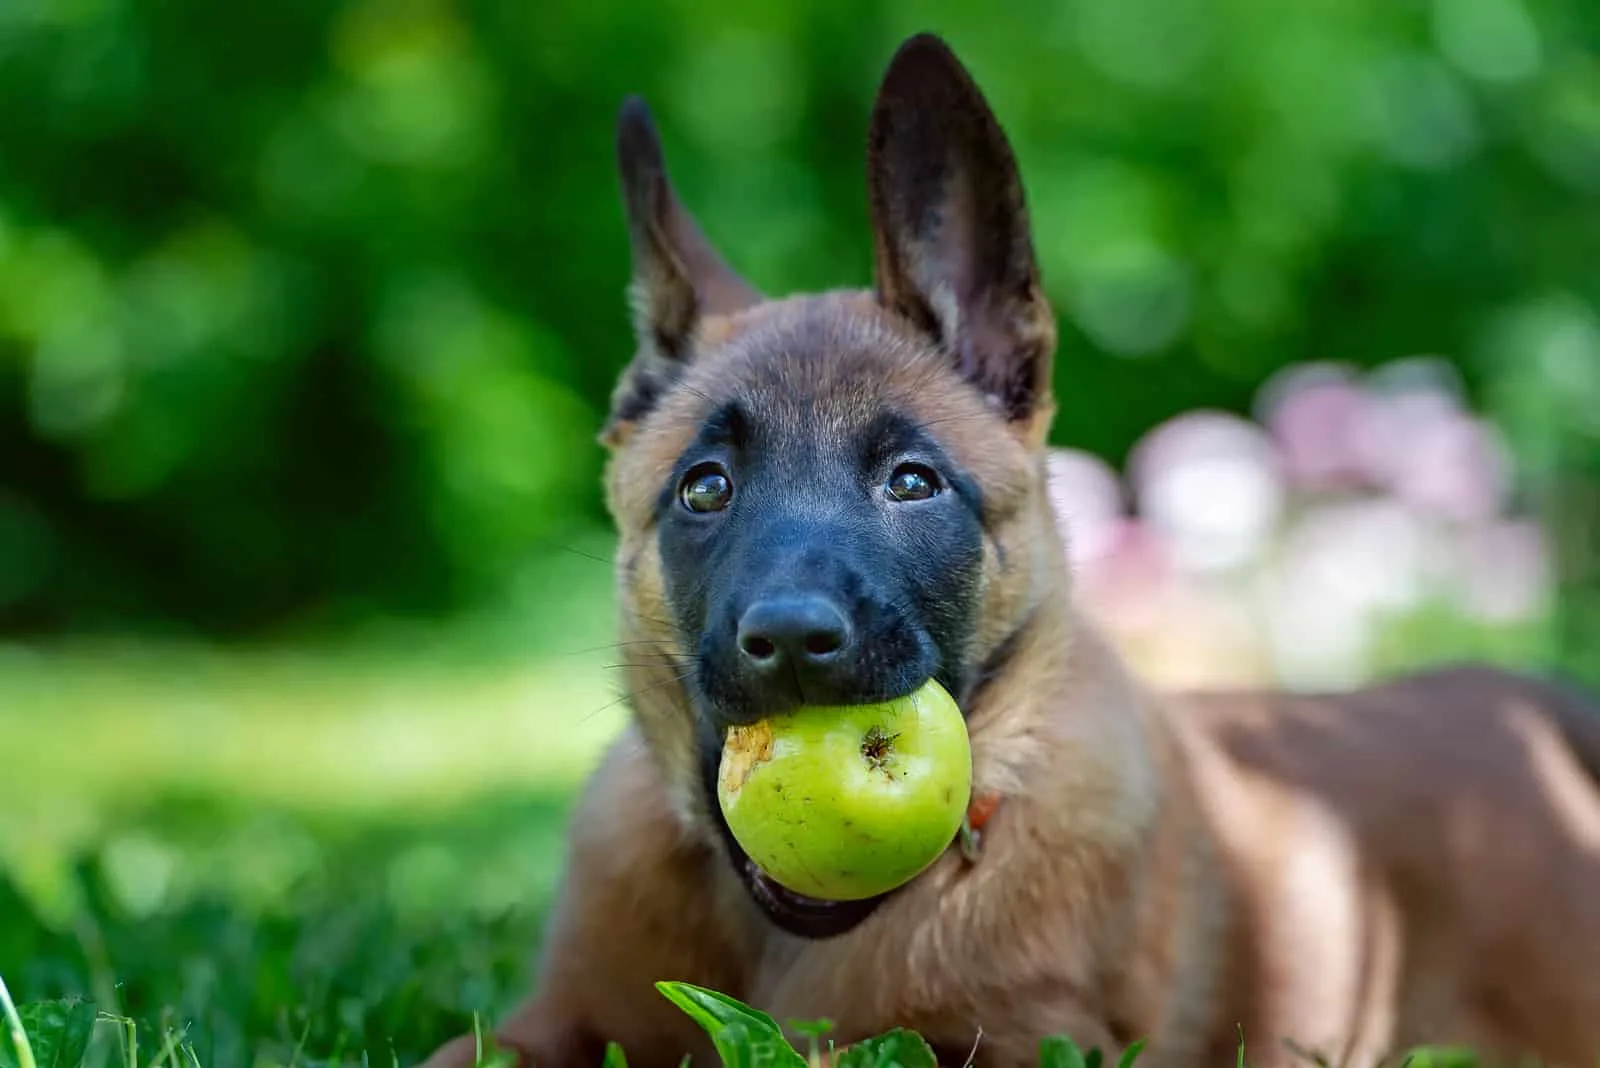 belgian malinois holding an apple in mouth